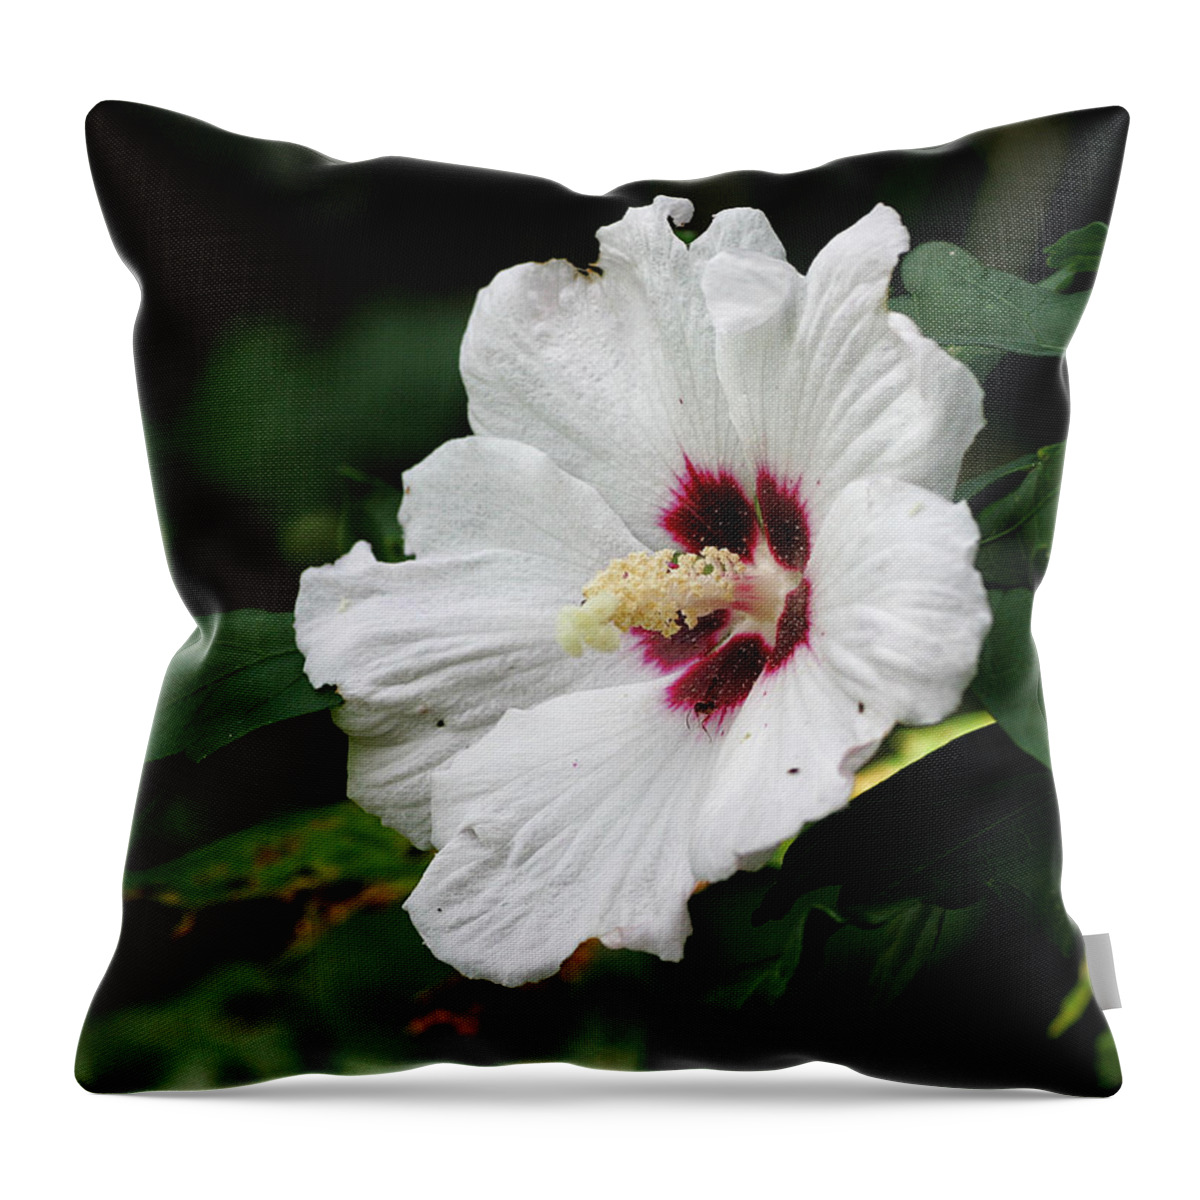 Flower Throw Pillow featuring the photograph White Hibiscus by William Selander